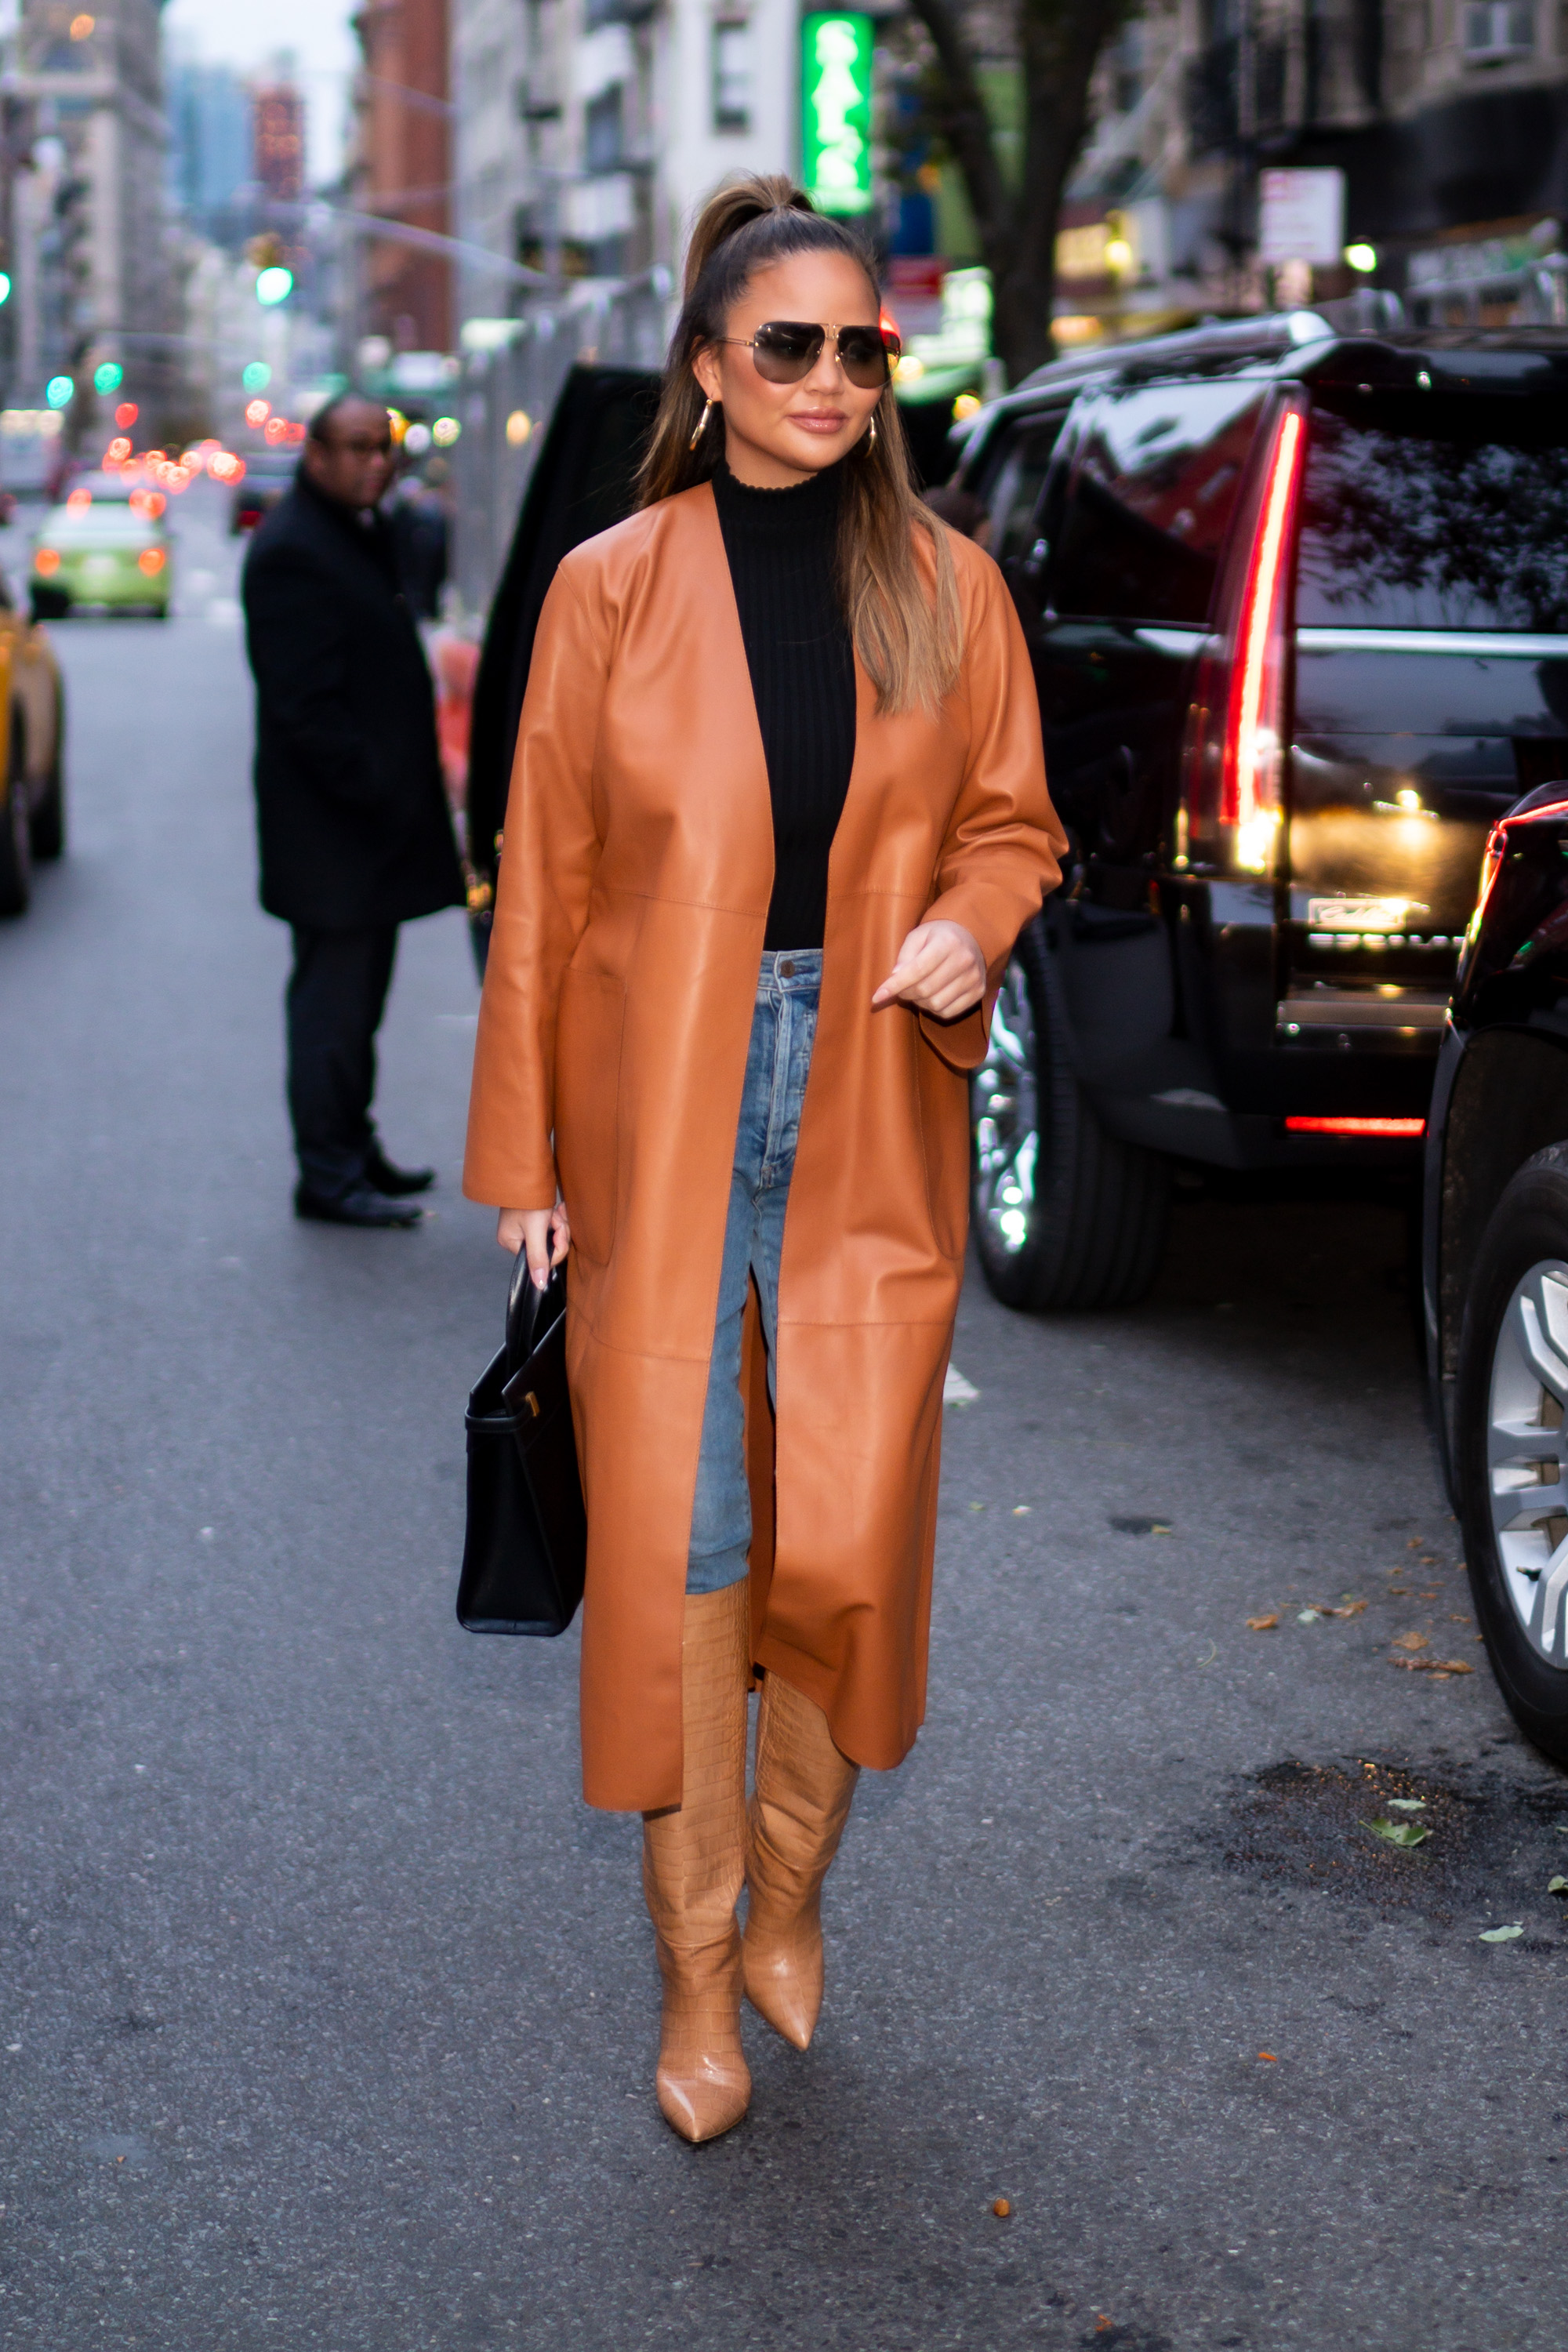 Chrissy Teigen outfit wearing jeans and boots